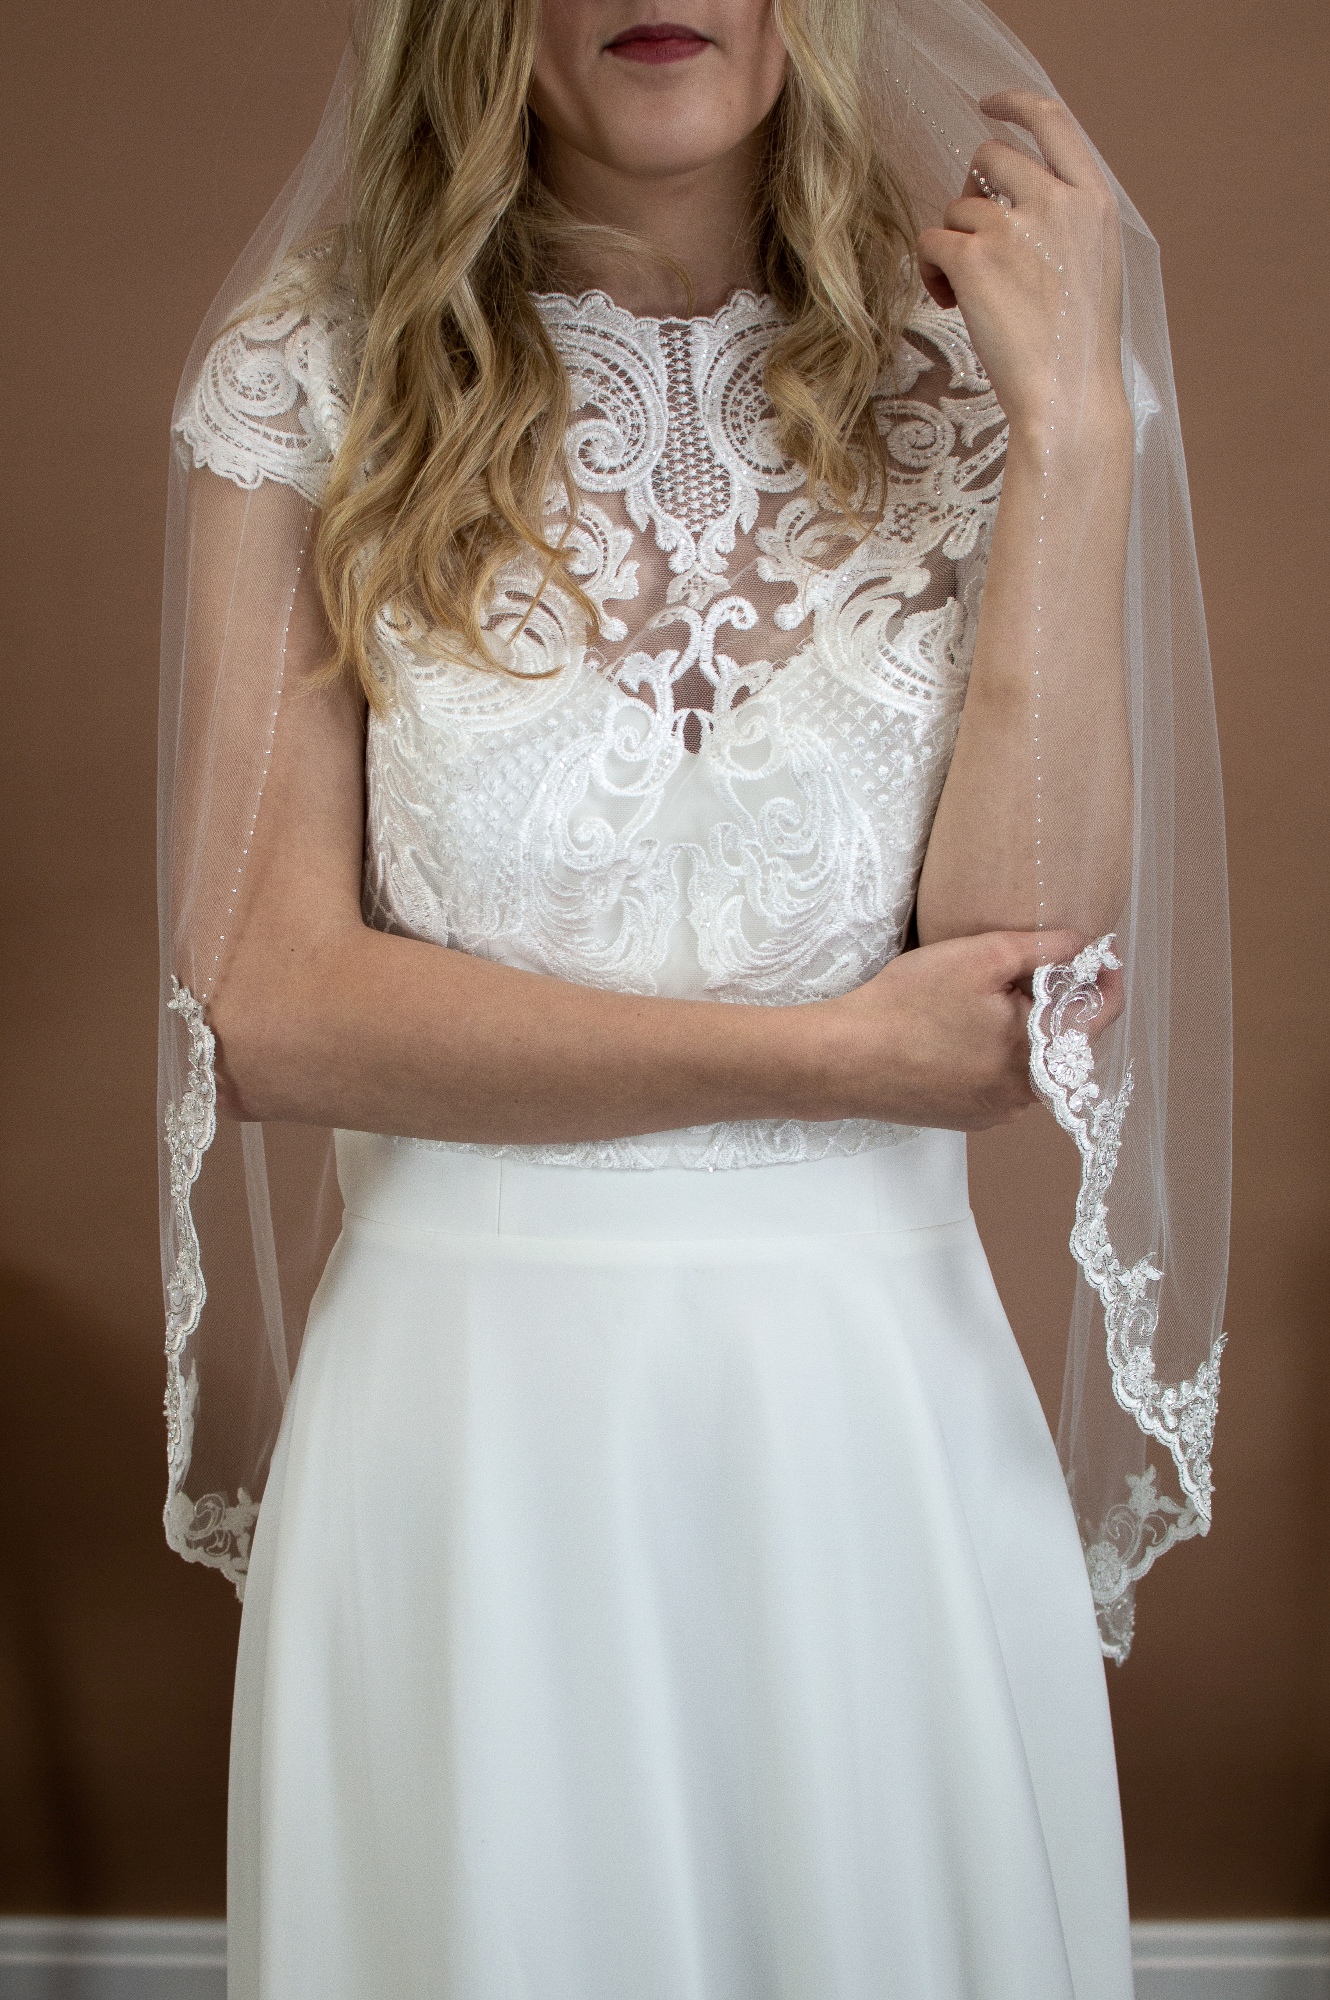 Alana single layer hip length veil with silver and ivory lace topped with a hand beaded edge on a bride font shot - The Wedding Veil Shop: Wedding Veil Lengths + Styles for Every Bride